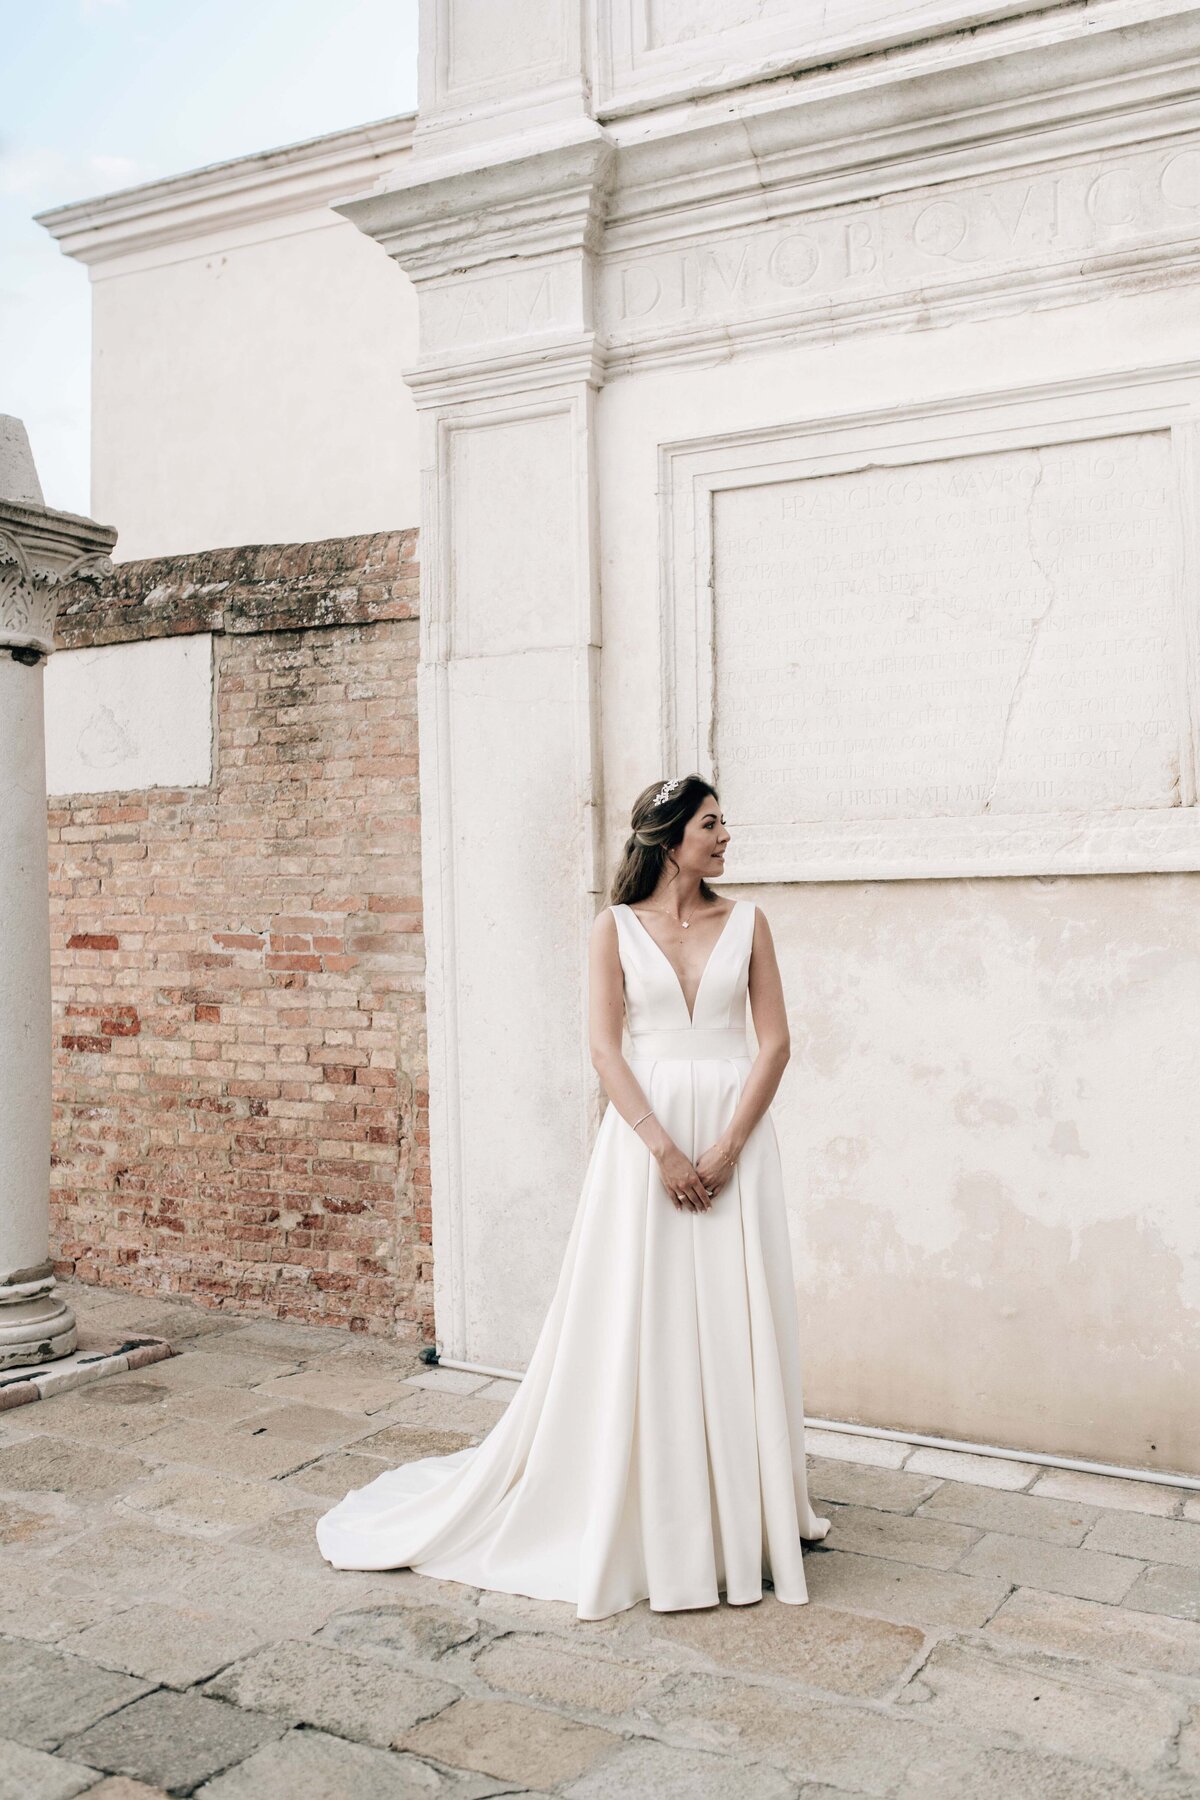 Flora_And_Grace_Italy_Editorial_Wedding_Photographer-16